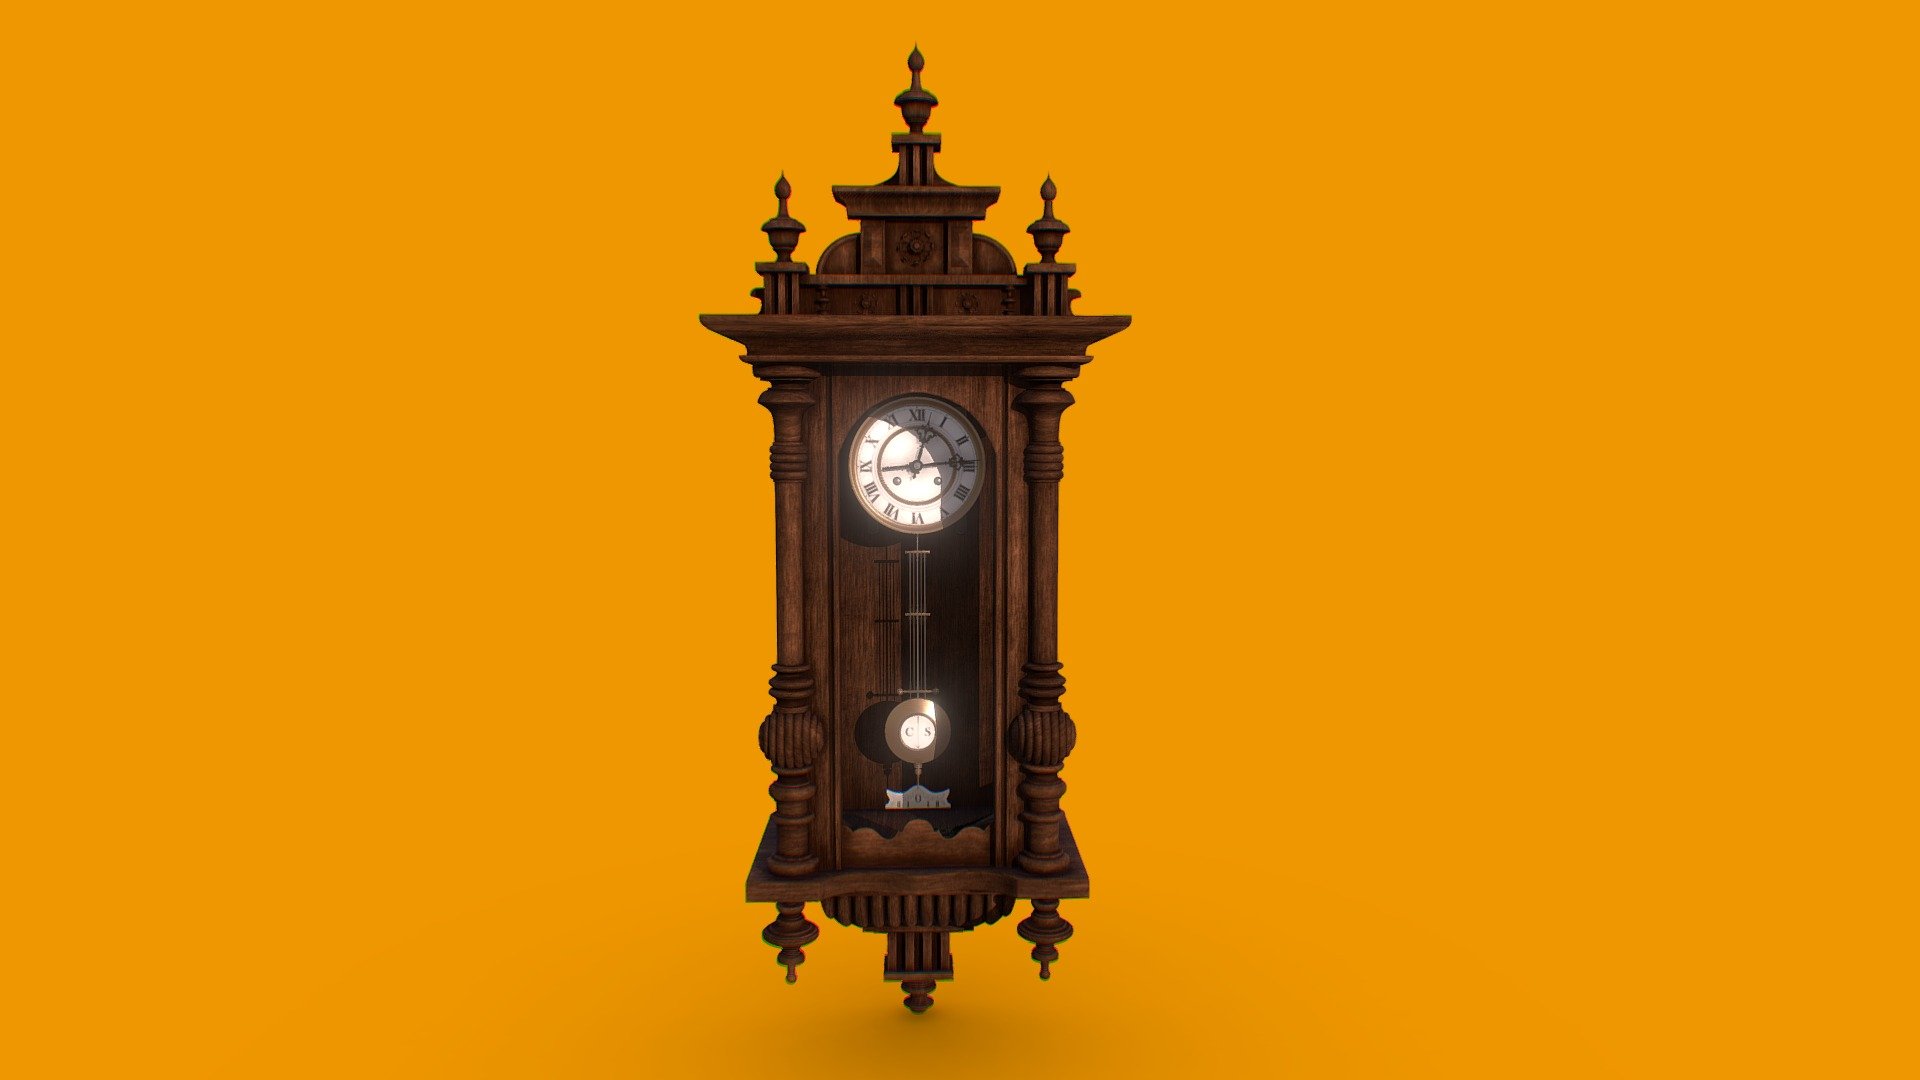 Give us a like if you download it, please.
Follow us on Instagram: https://www.instagram.com/agencia.alterego/

Beautiful hyperrealistic old pendulum clock modeled in 3DS Max to decorate your scene.
Polys: 392.115 - Pendulum Wall Clock - Buy Royalty Free 3D model by Álterego (@alter_ego) 3d model